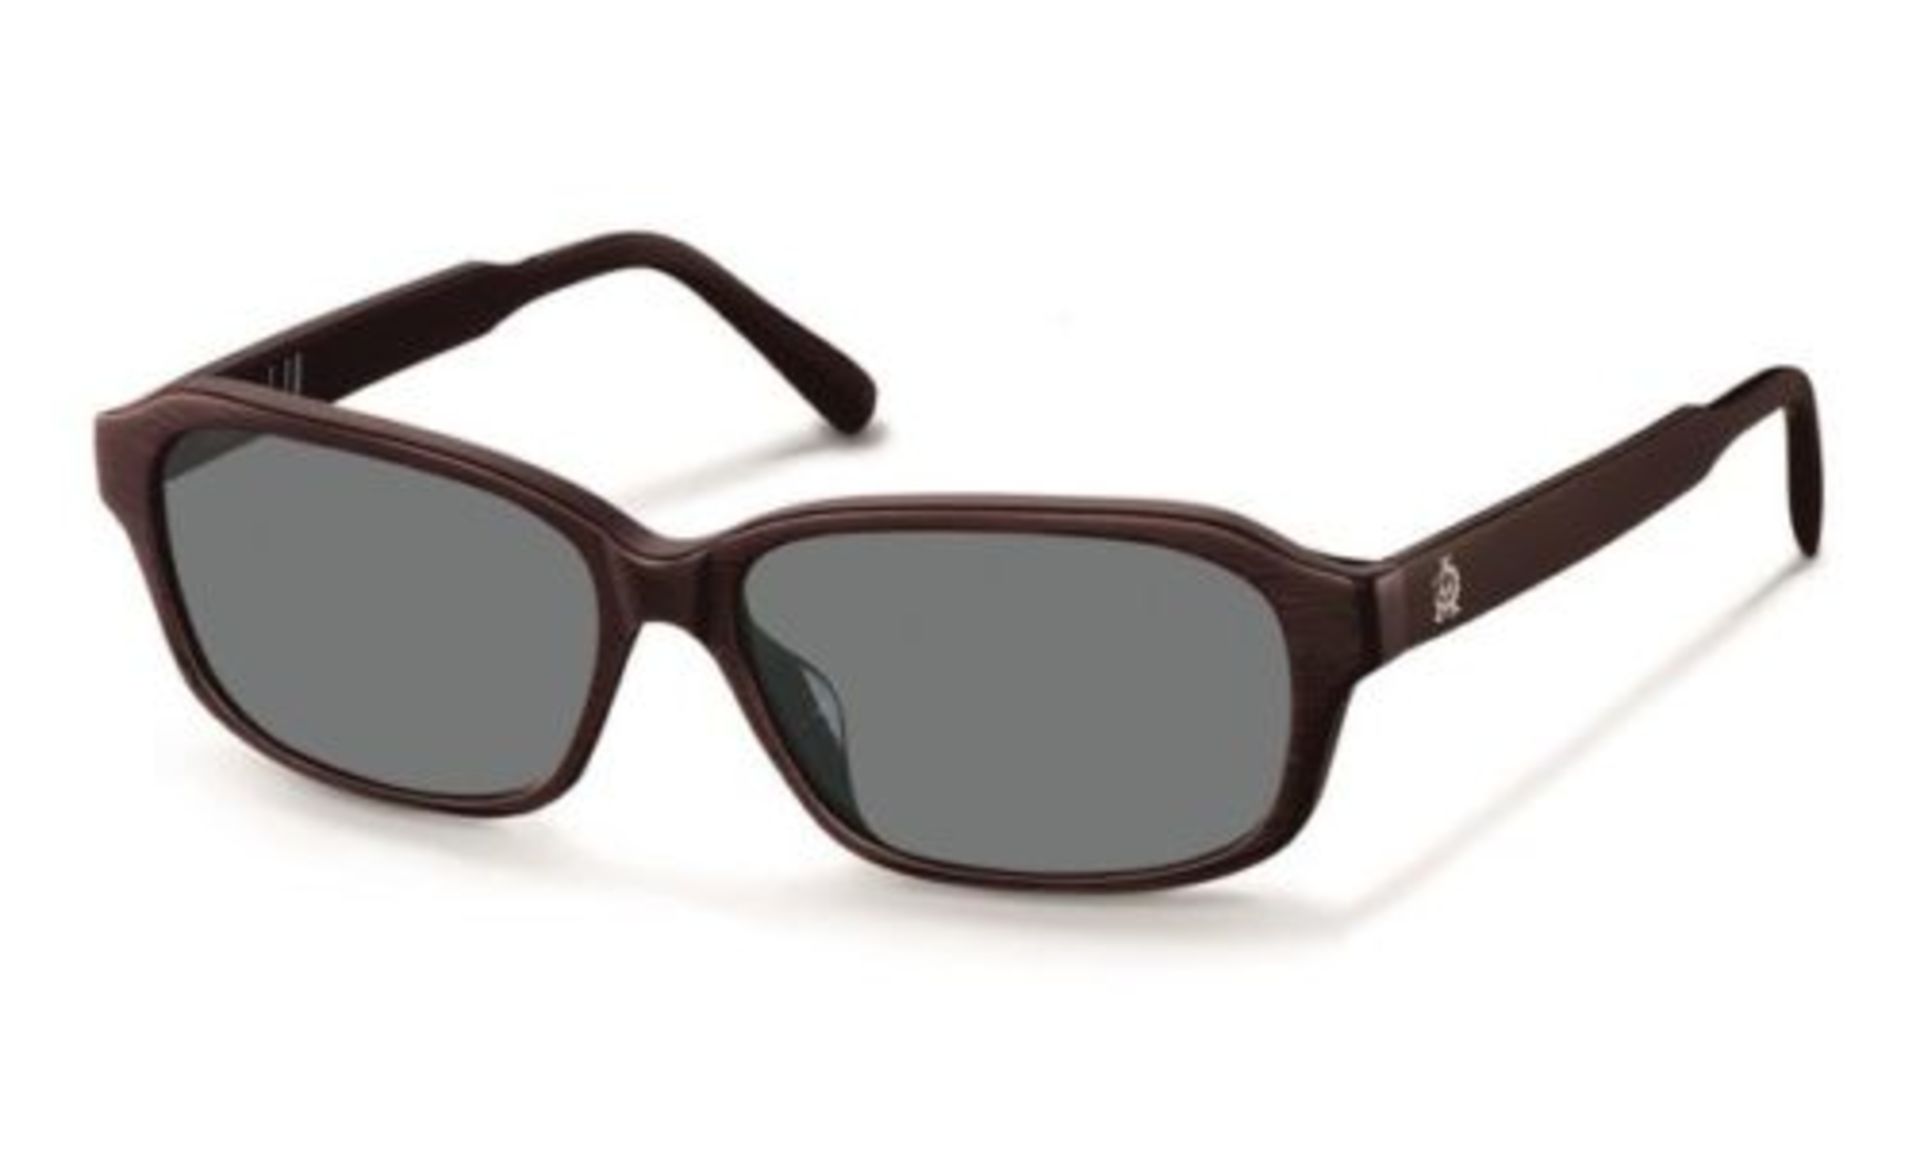 Brand New Pair Of Womens Dunhill Sunglasses - Burgundy Frame With Grey lens RRP: £179.99 D7002-B X